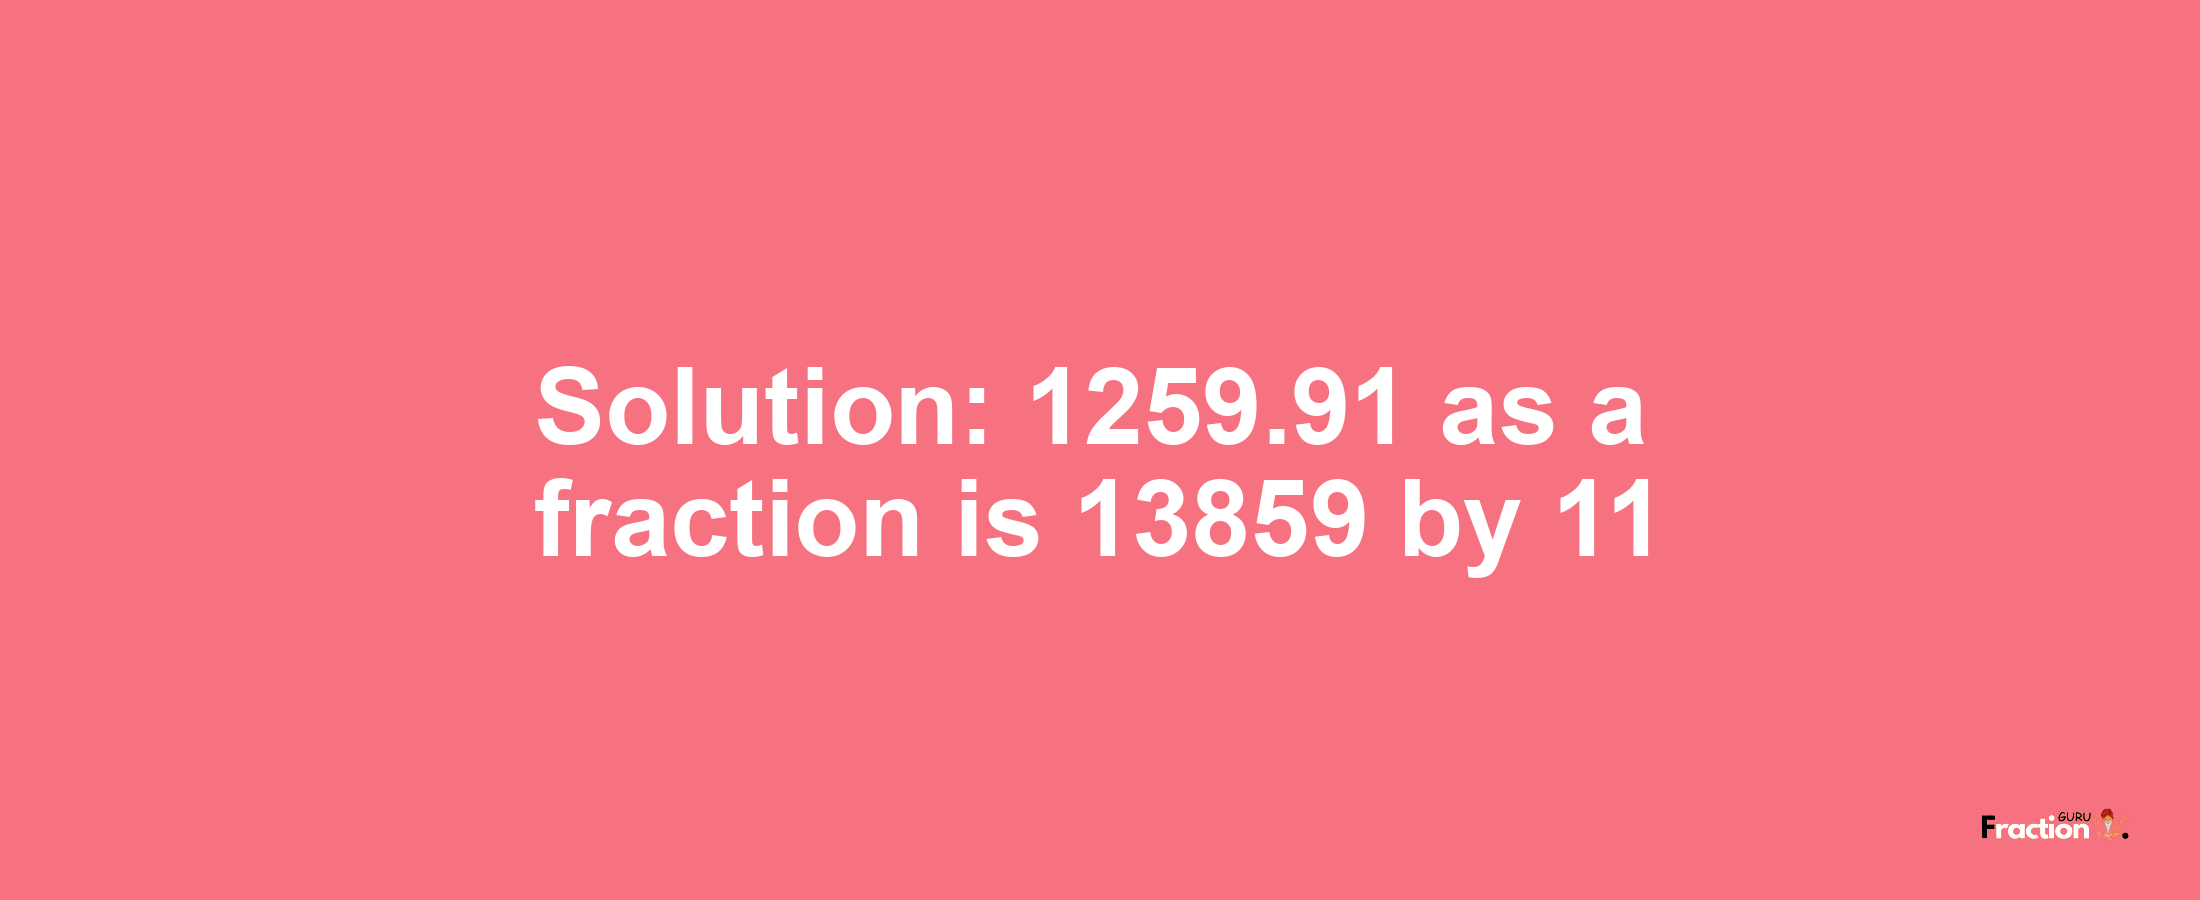 Solution:1259.91 as a fraction is 13859/11